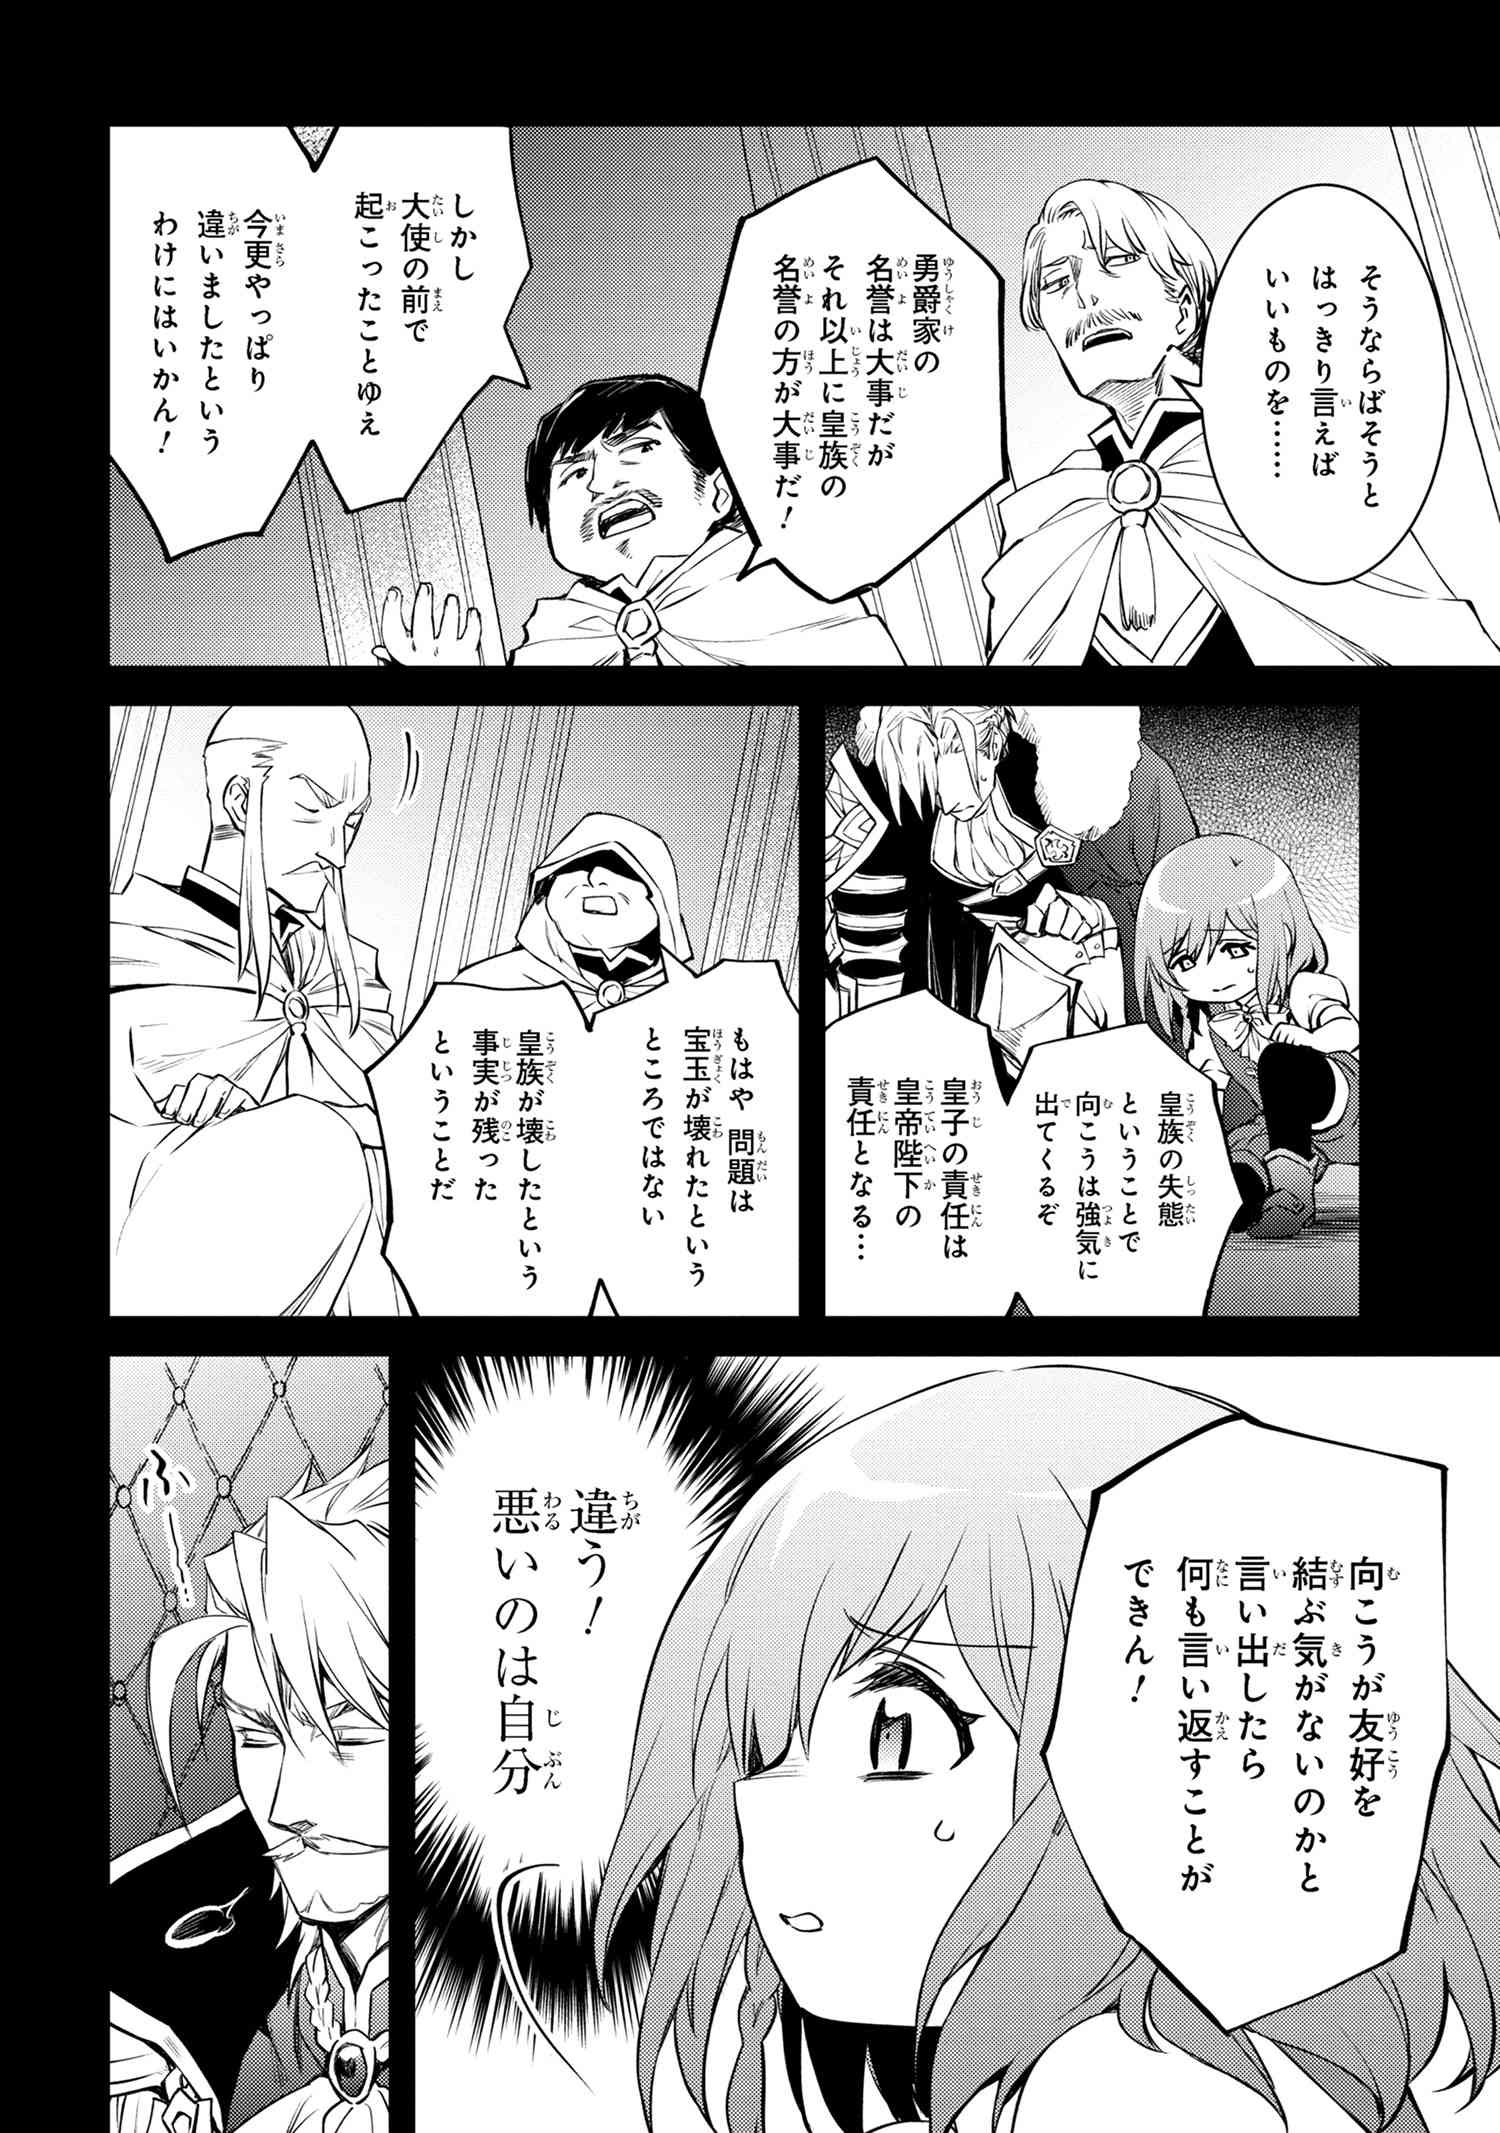 The Strongest Dull Prince’s Secret Battle for the Throne - Chapter 39.2 - Page 6